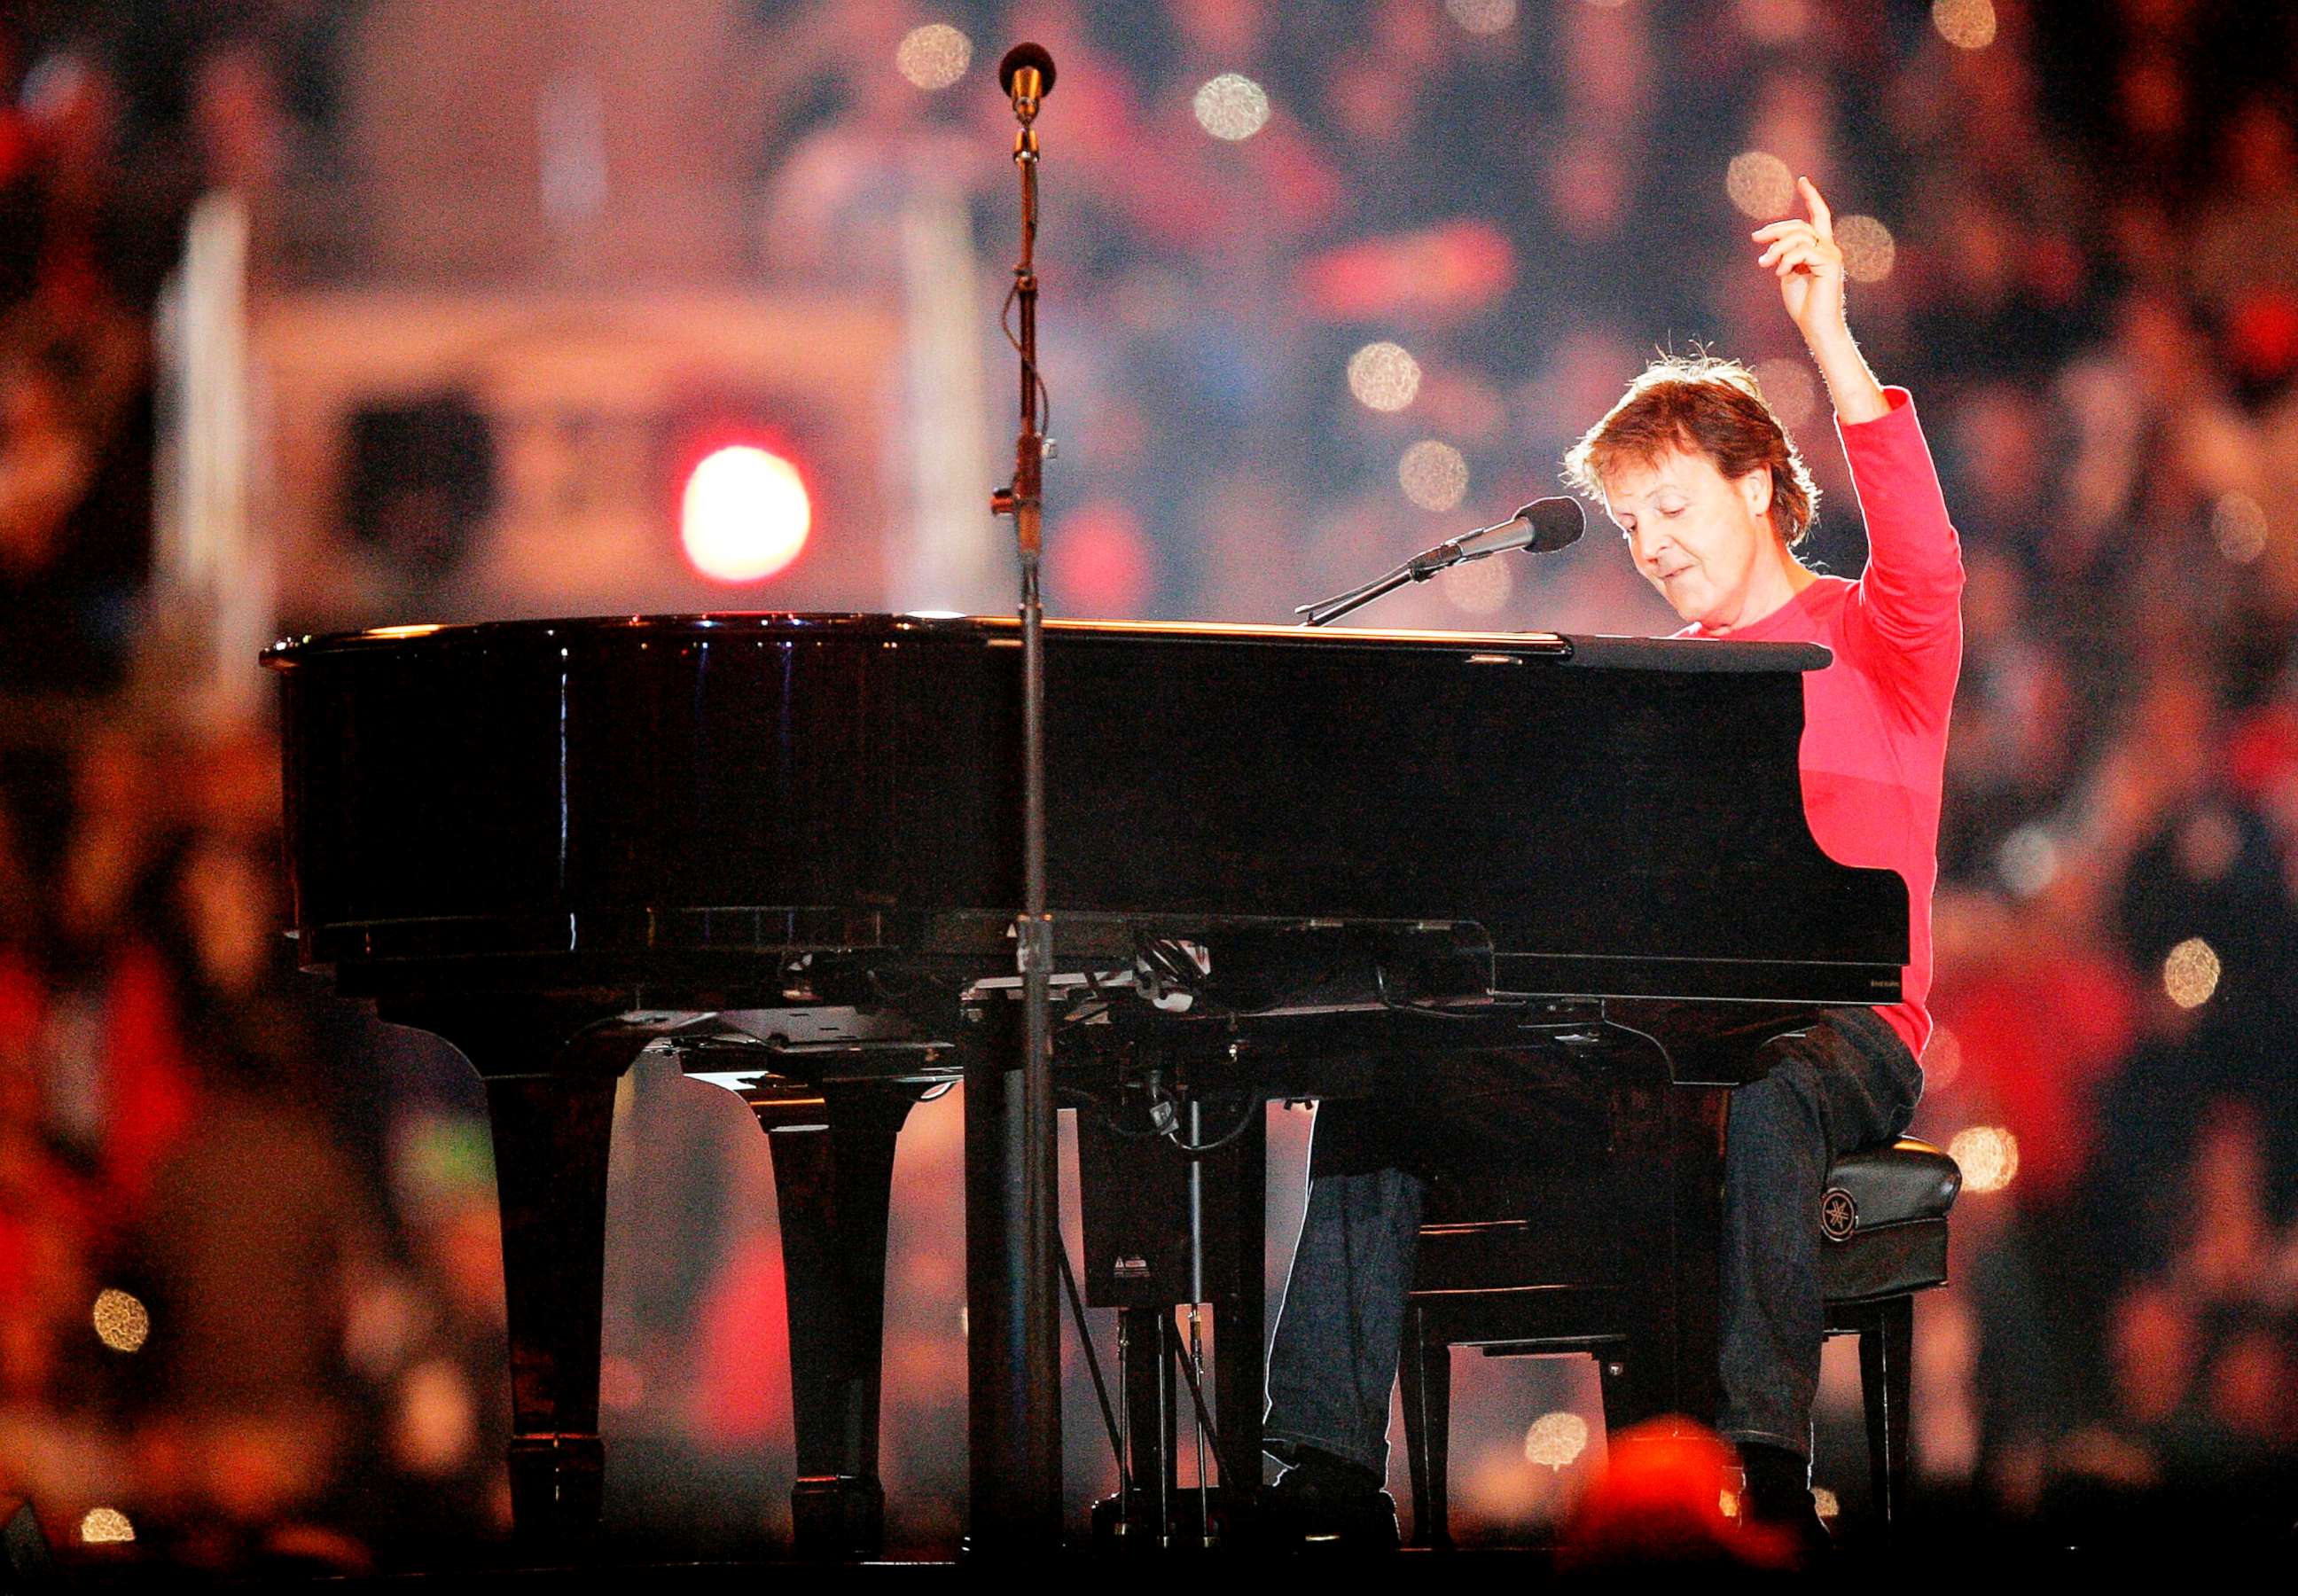 PHOTO: Singer Paul McCartney performs during the Super Bowl XXXIX halftime show at Alltel Stadium, Feb. 6, 2005, in Jacksonville, Fla.